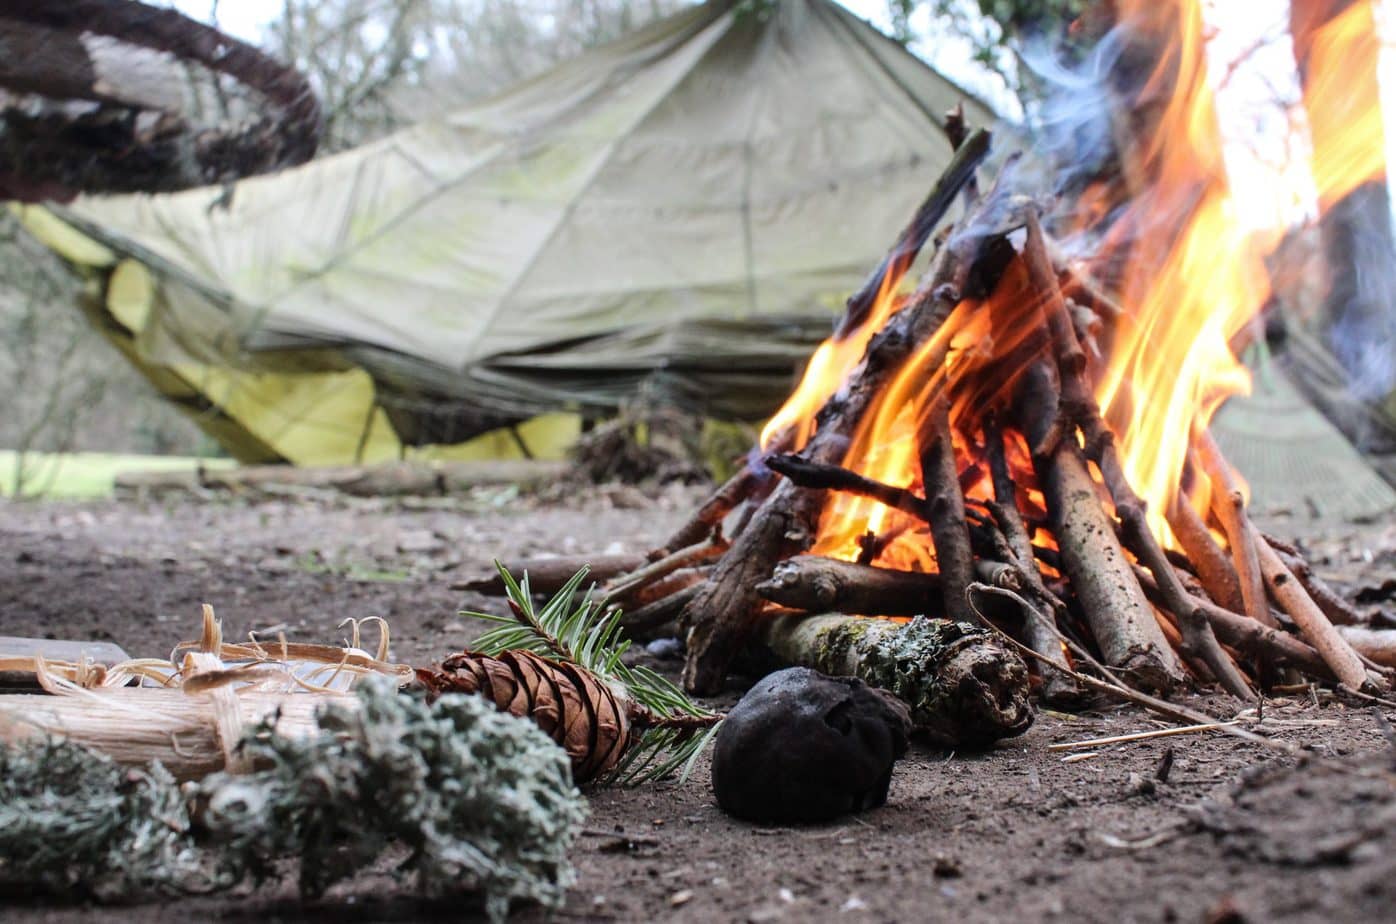 The ABCs of Survival: Basic rules for setting up camp in the woods